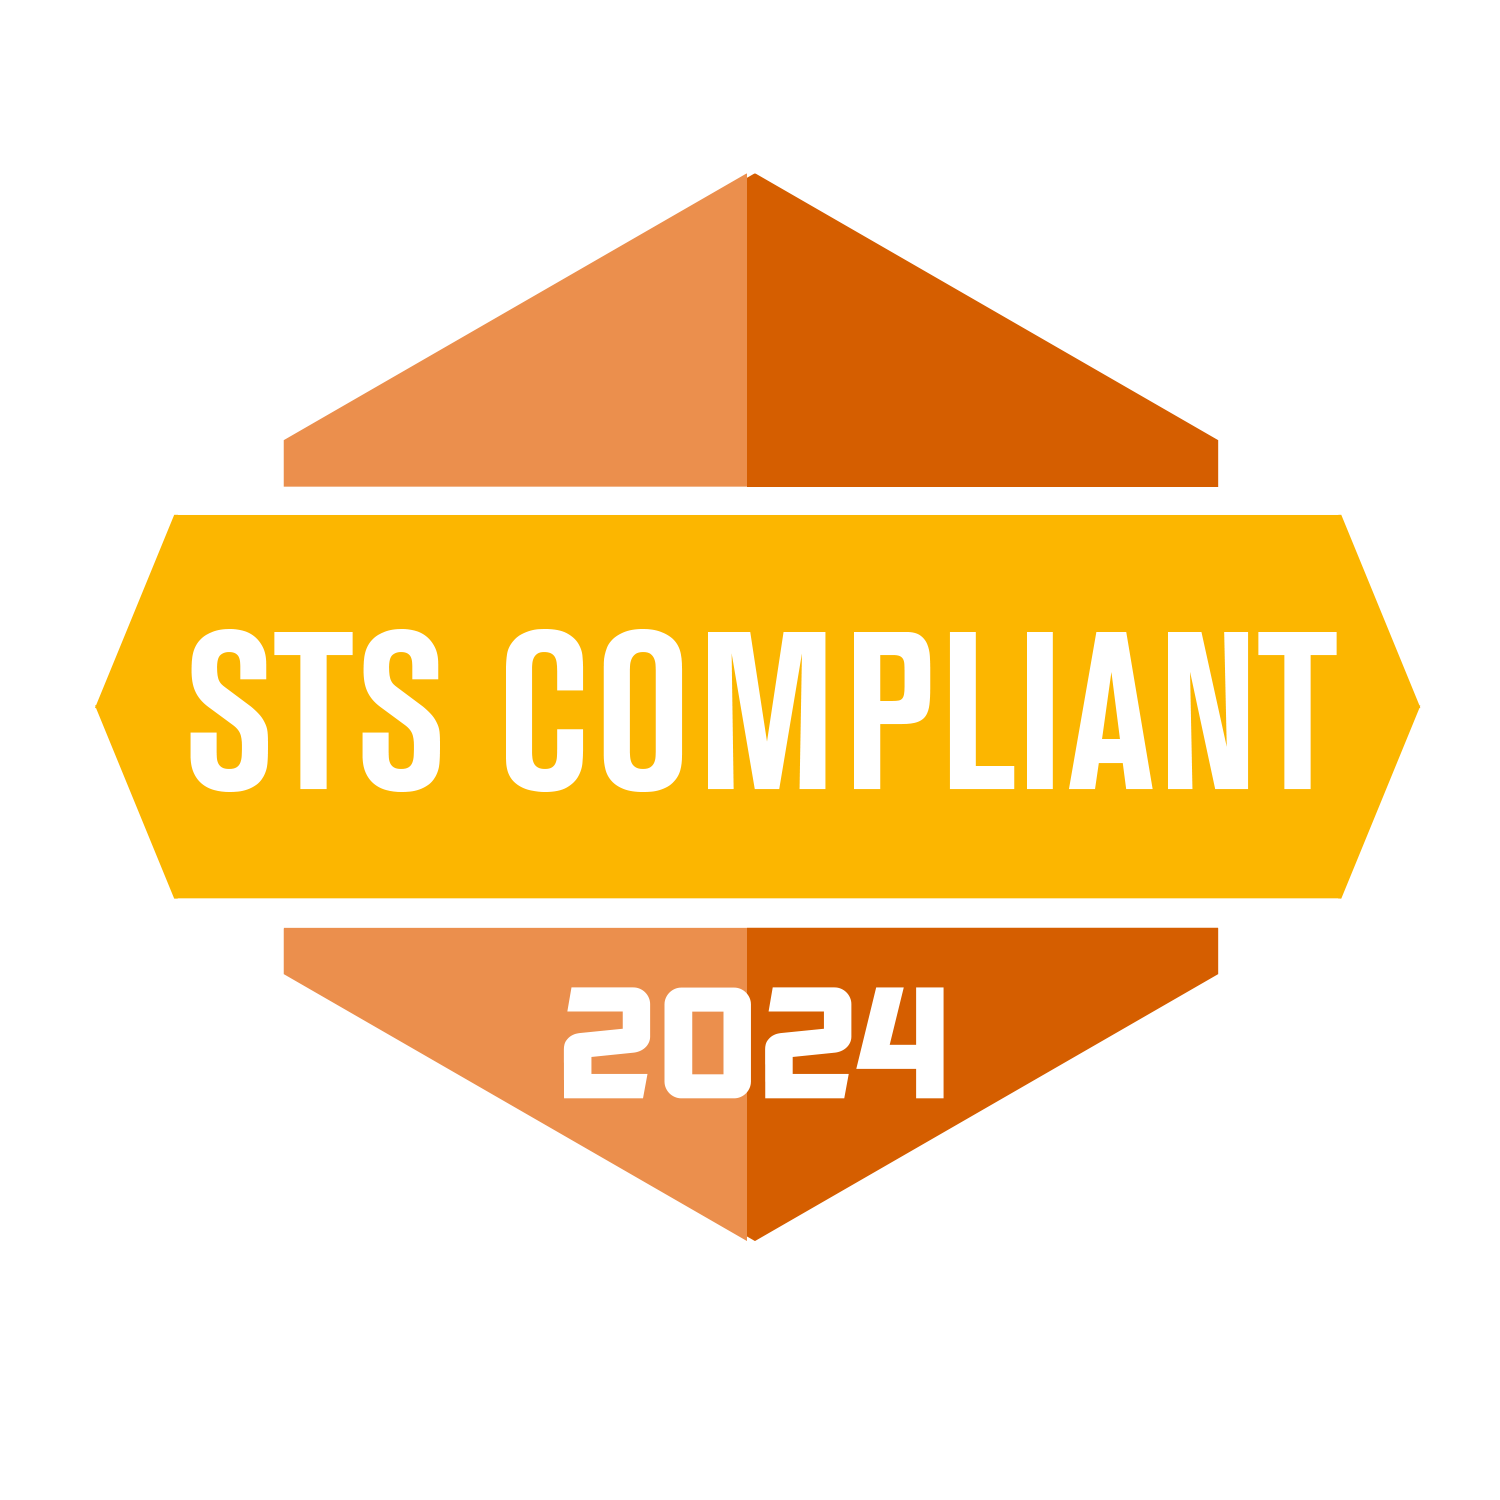 sts compliant 2024 badge